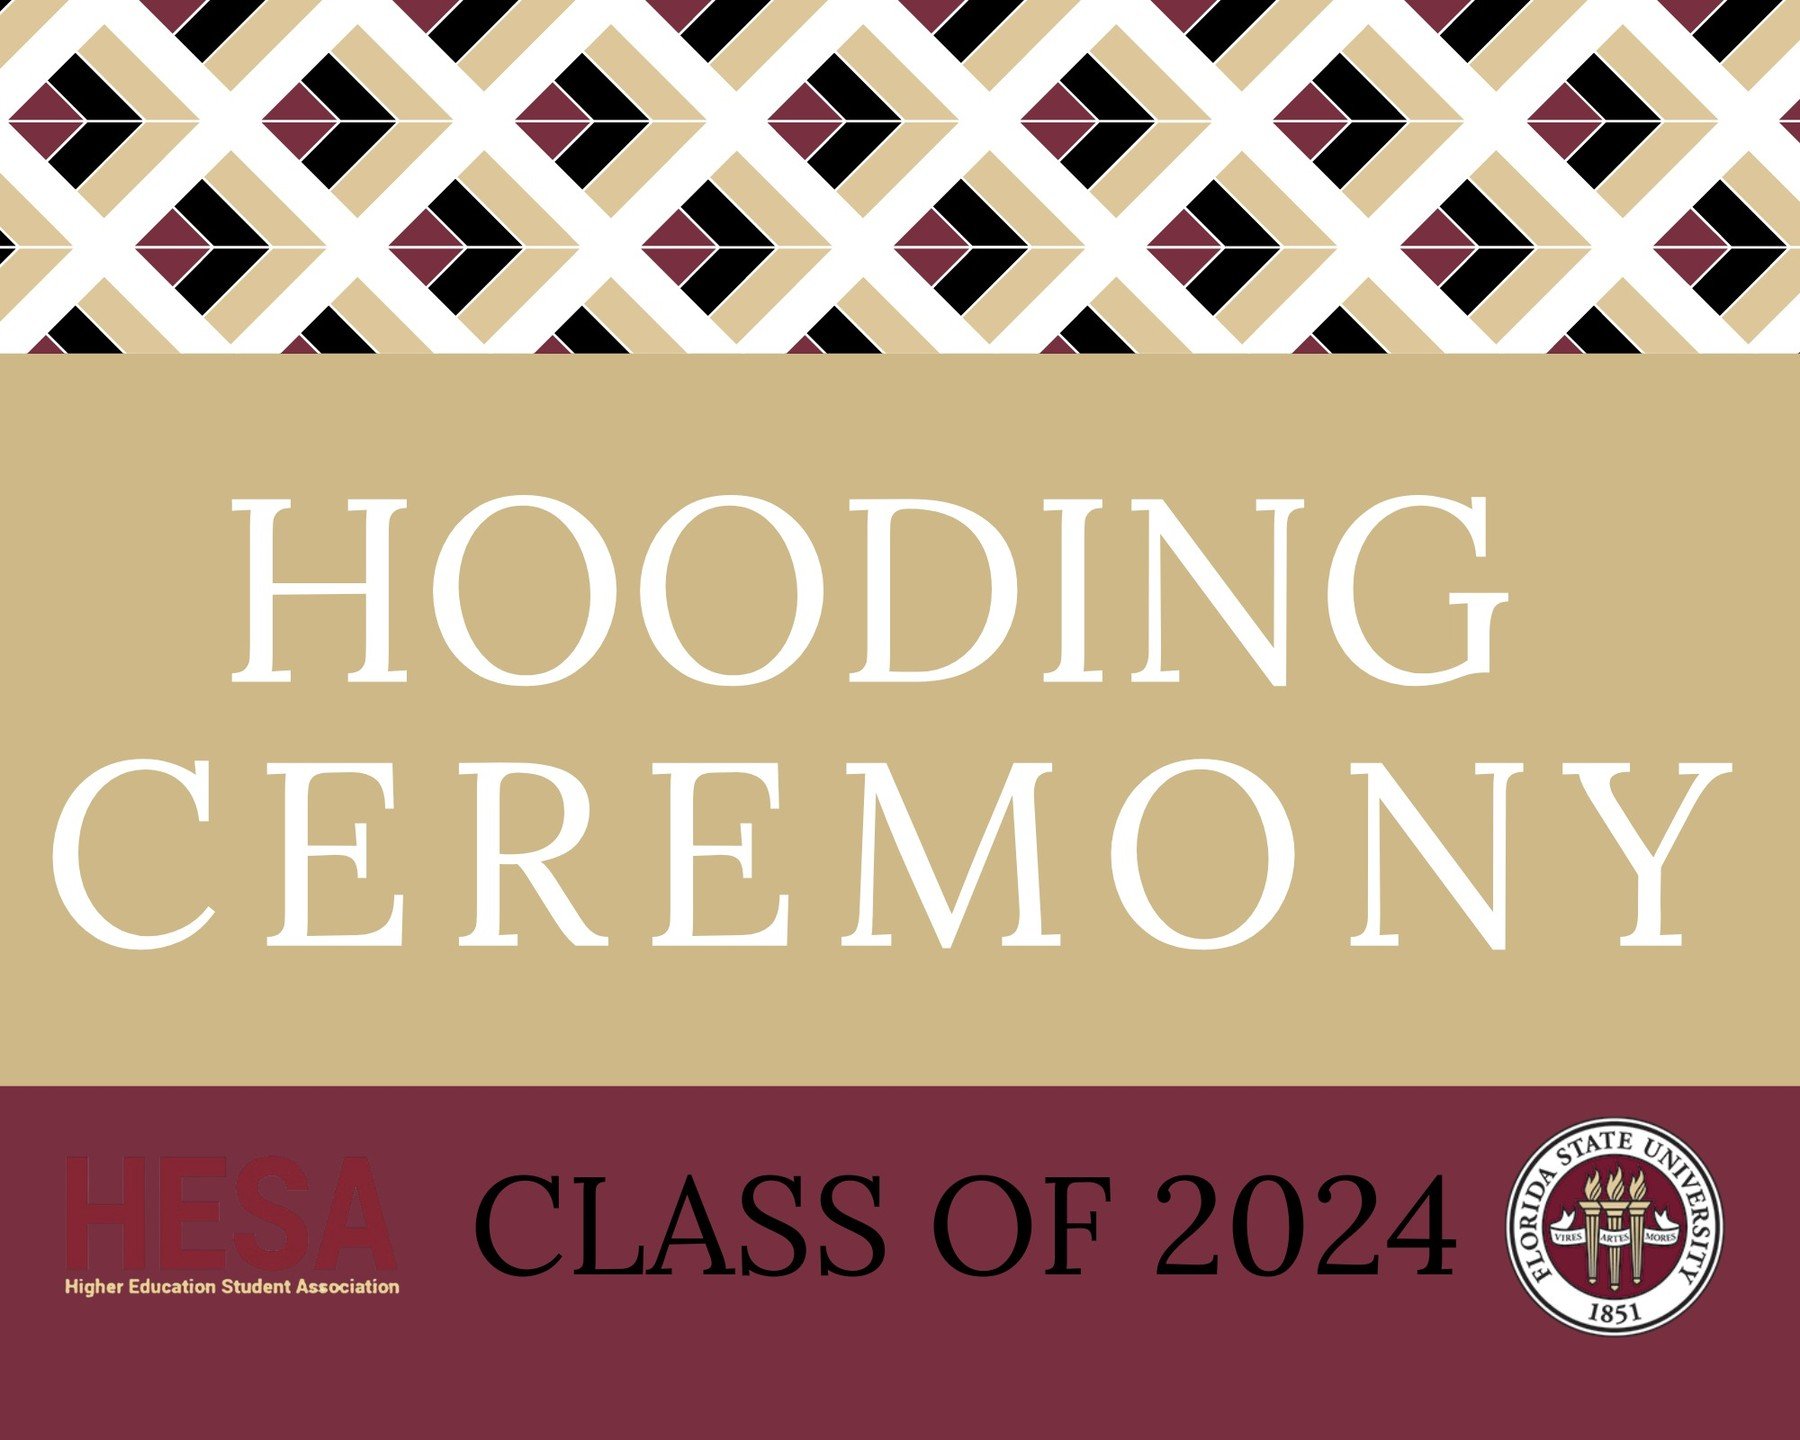 📈Level up! Officially a Masters of Science in Higher Education from CEHHS. Here's to shaping the future of learning! #CEHHSGrads #MastersDegree #HESA #FSUHESA